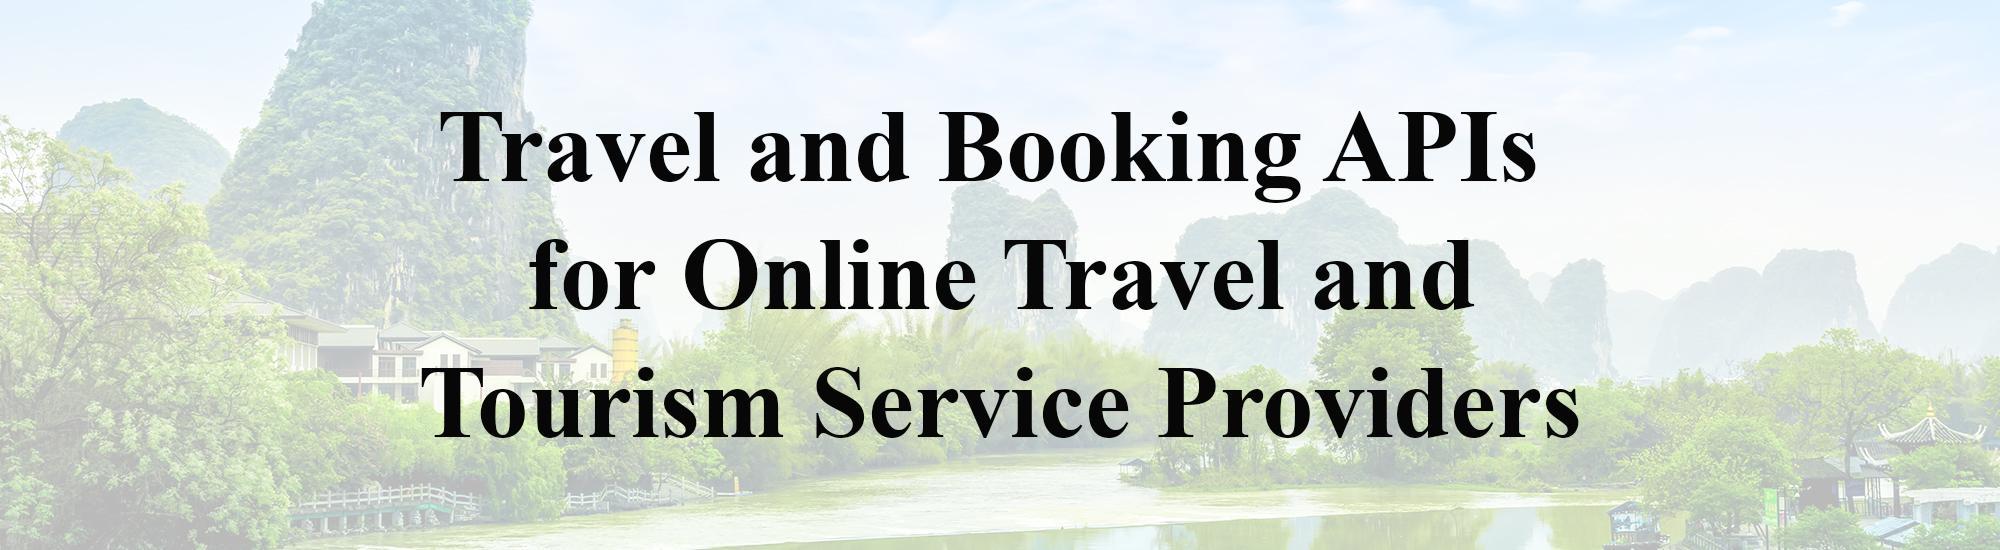 Travel and Booking APIs